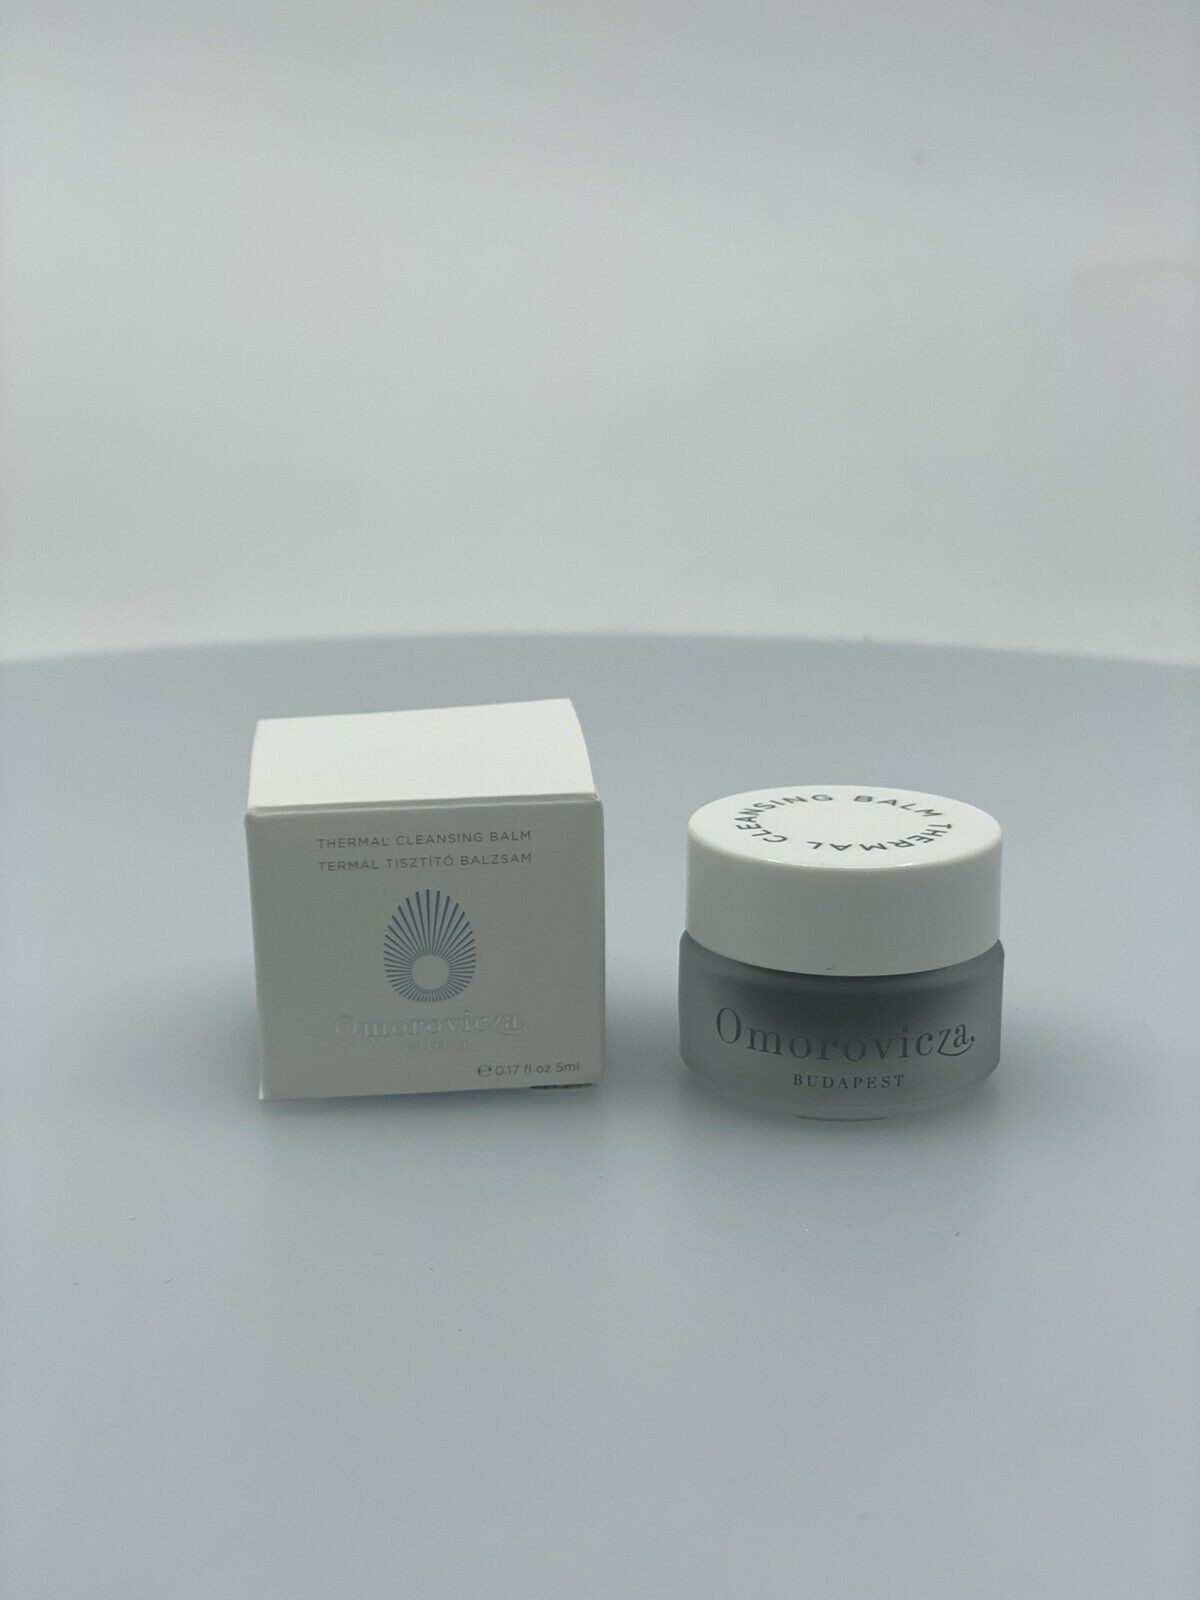 OMOROVICZA Thermal CLEANSING Balm .17oz/5ml New In box! Amazing Product!